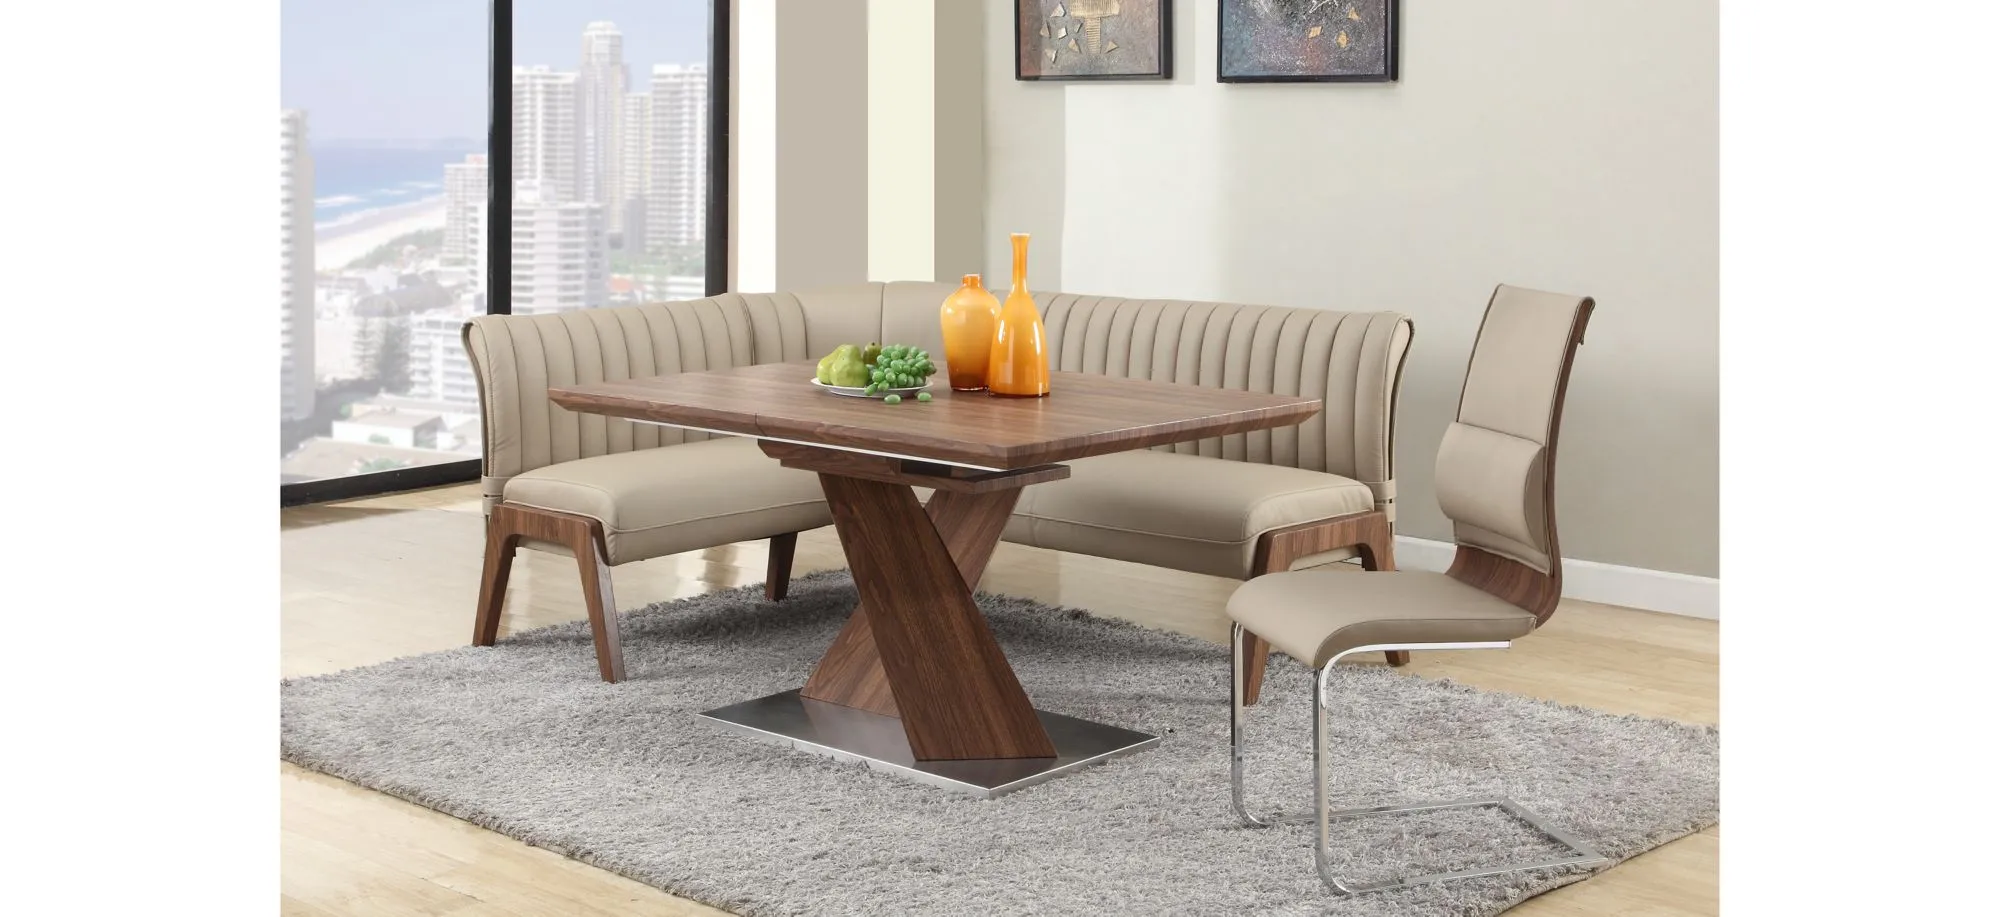 Bethany 3-pc. Breakfast Nook Dining Set in Walnut / Taupe by Chintaly Imports